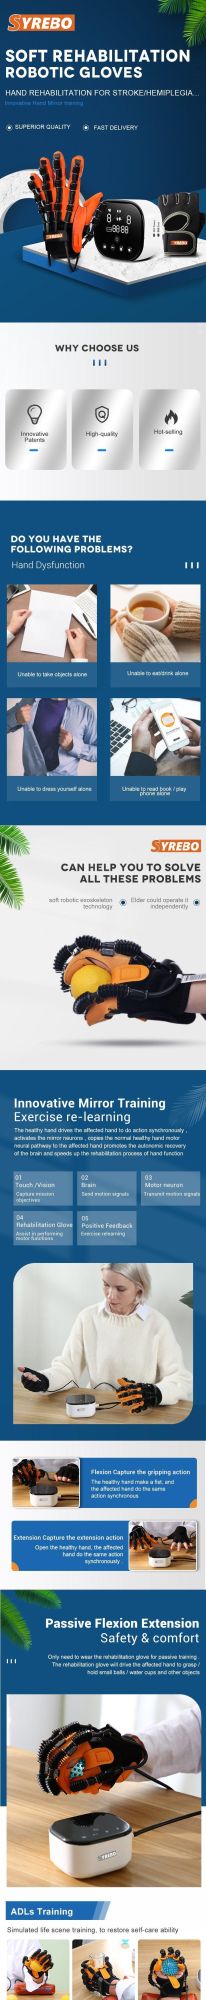 Best Selling Hand Rehabilitation Robot Gloves with Mirror Therapy Compression Massage for Stroke Hand Finger Recovery Exercise